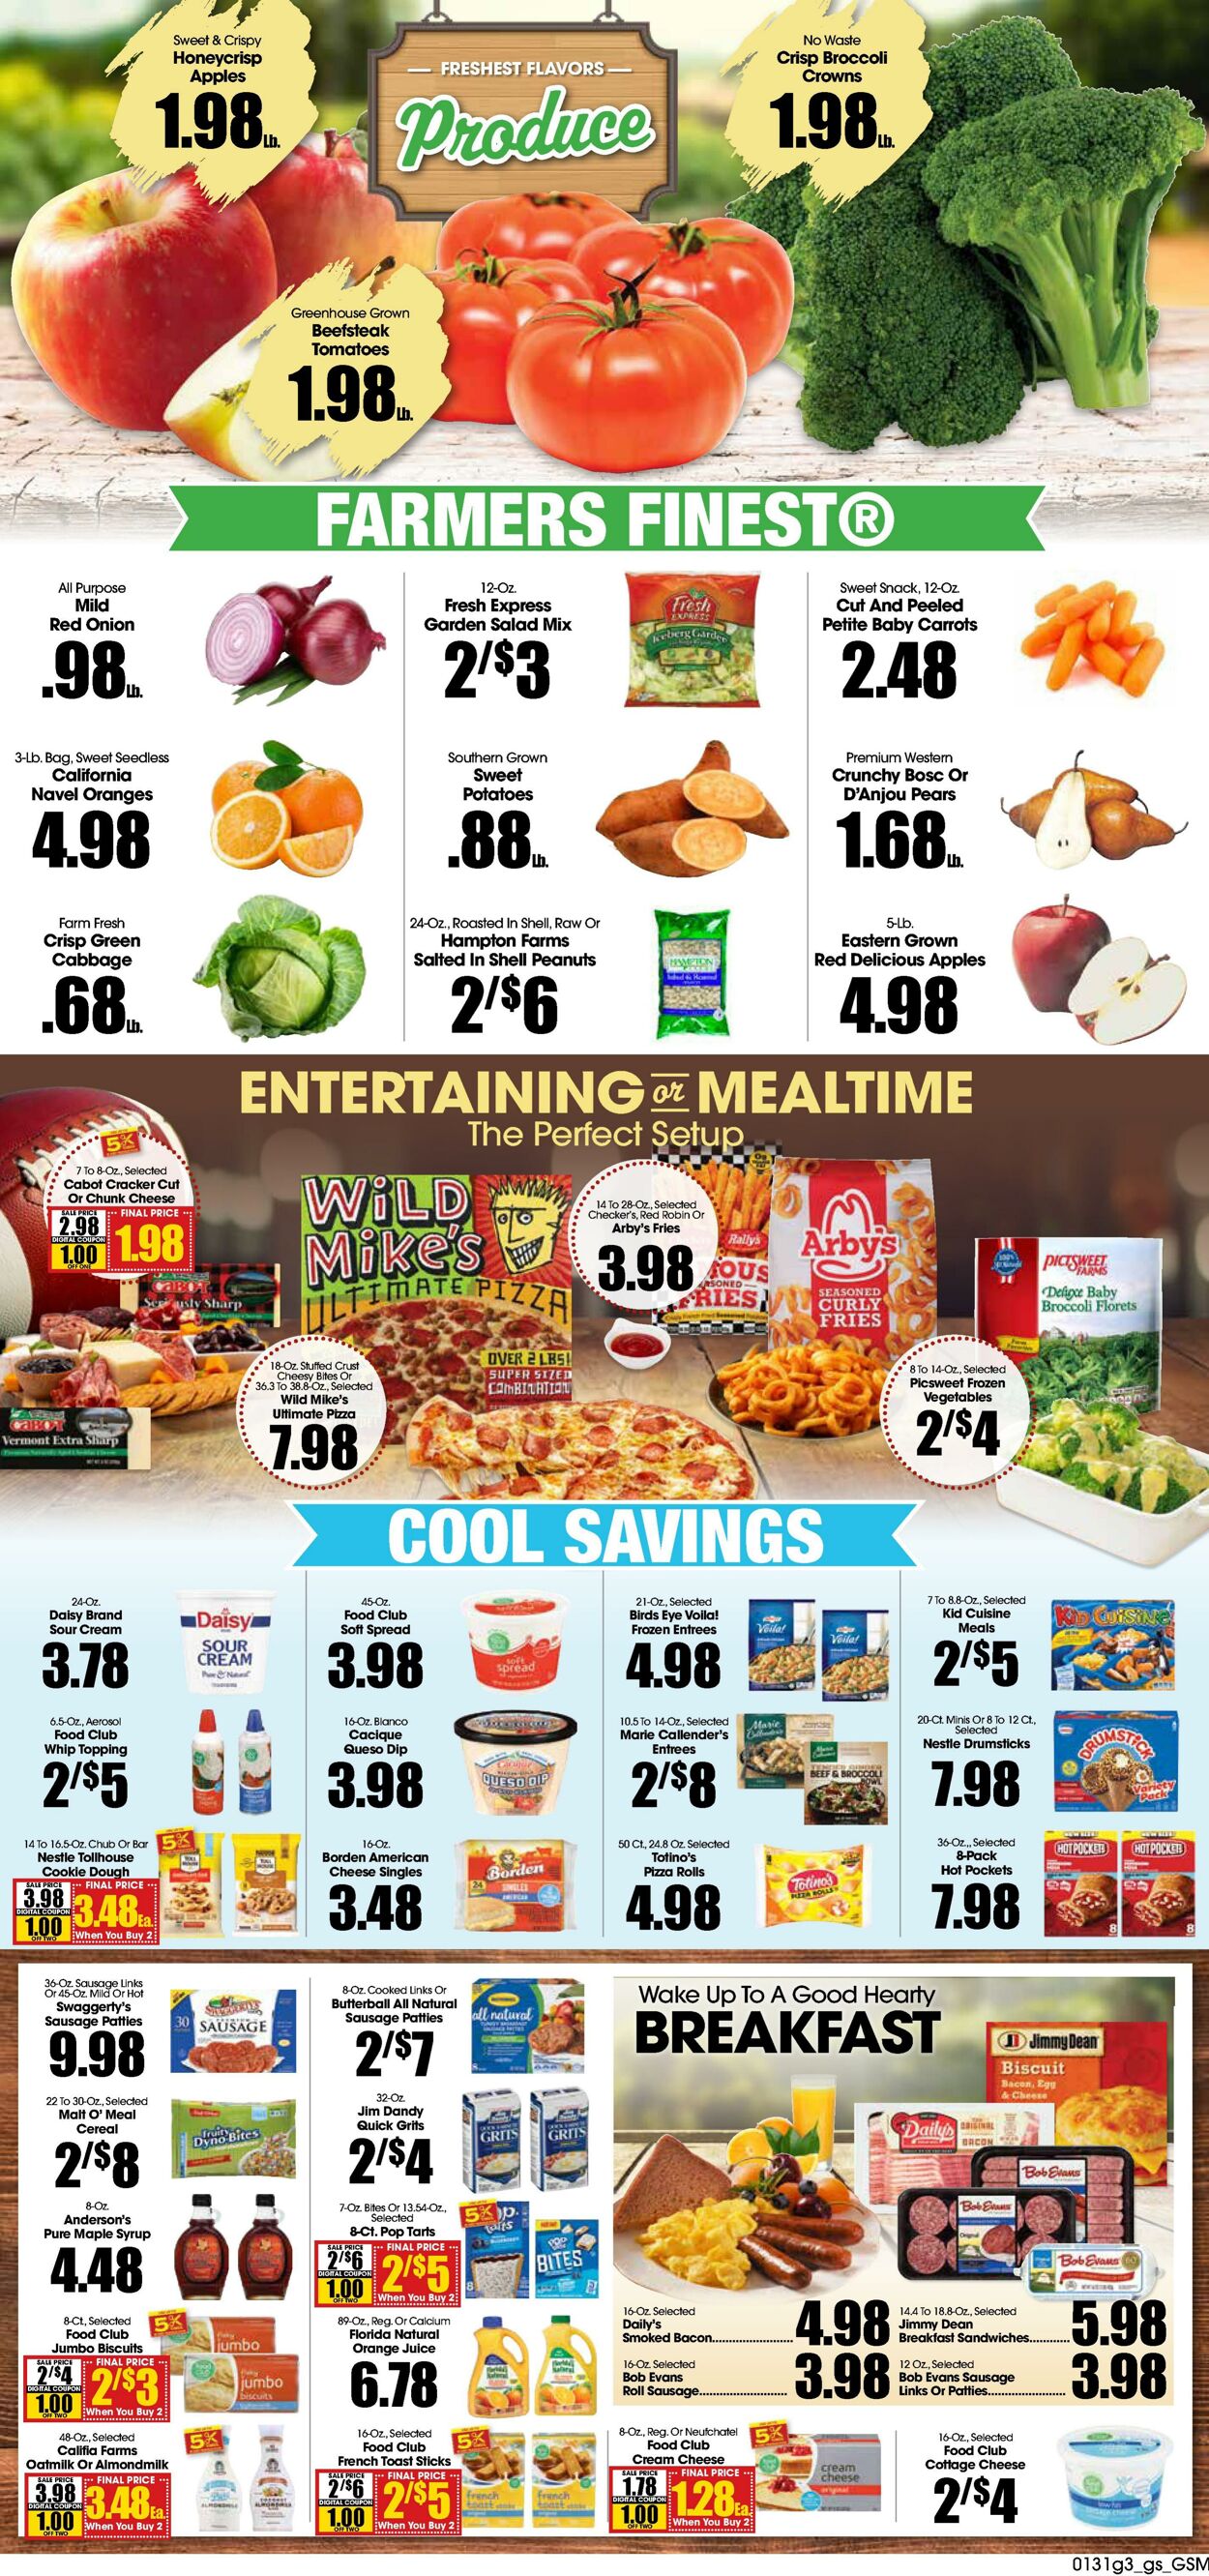 Weekly ad Grant's Supermarkets 01/31/2024 - 02/06/2024